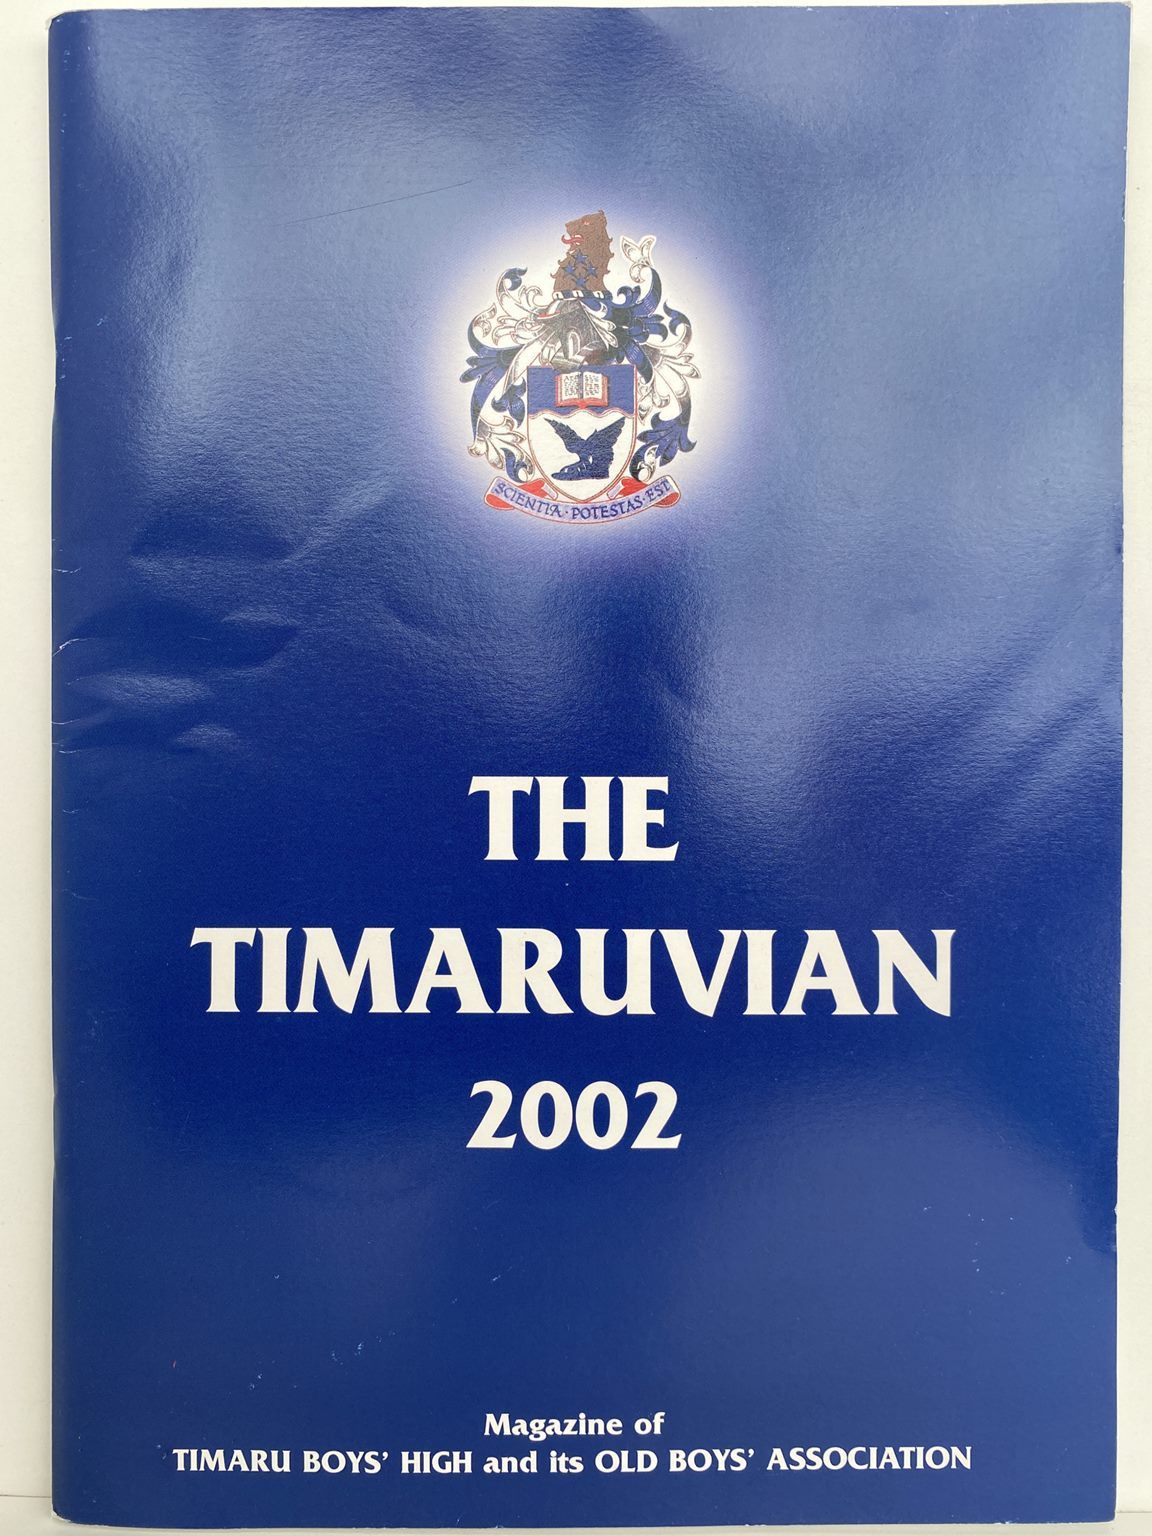 THE TIMARUVIAN: Magazine of the Timaru Boys' High School and its Old Boys' Association 2002